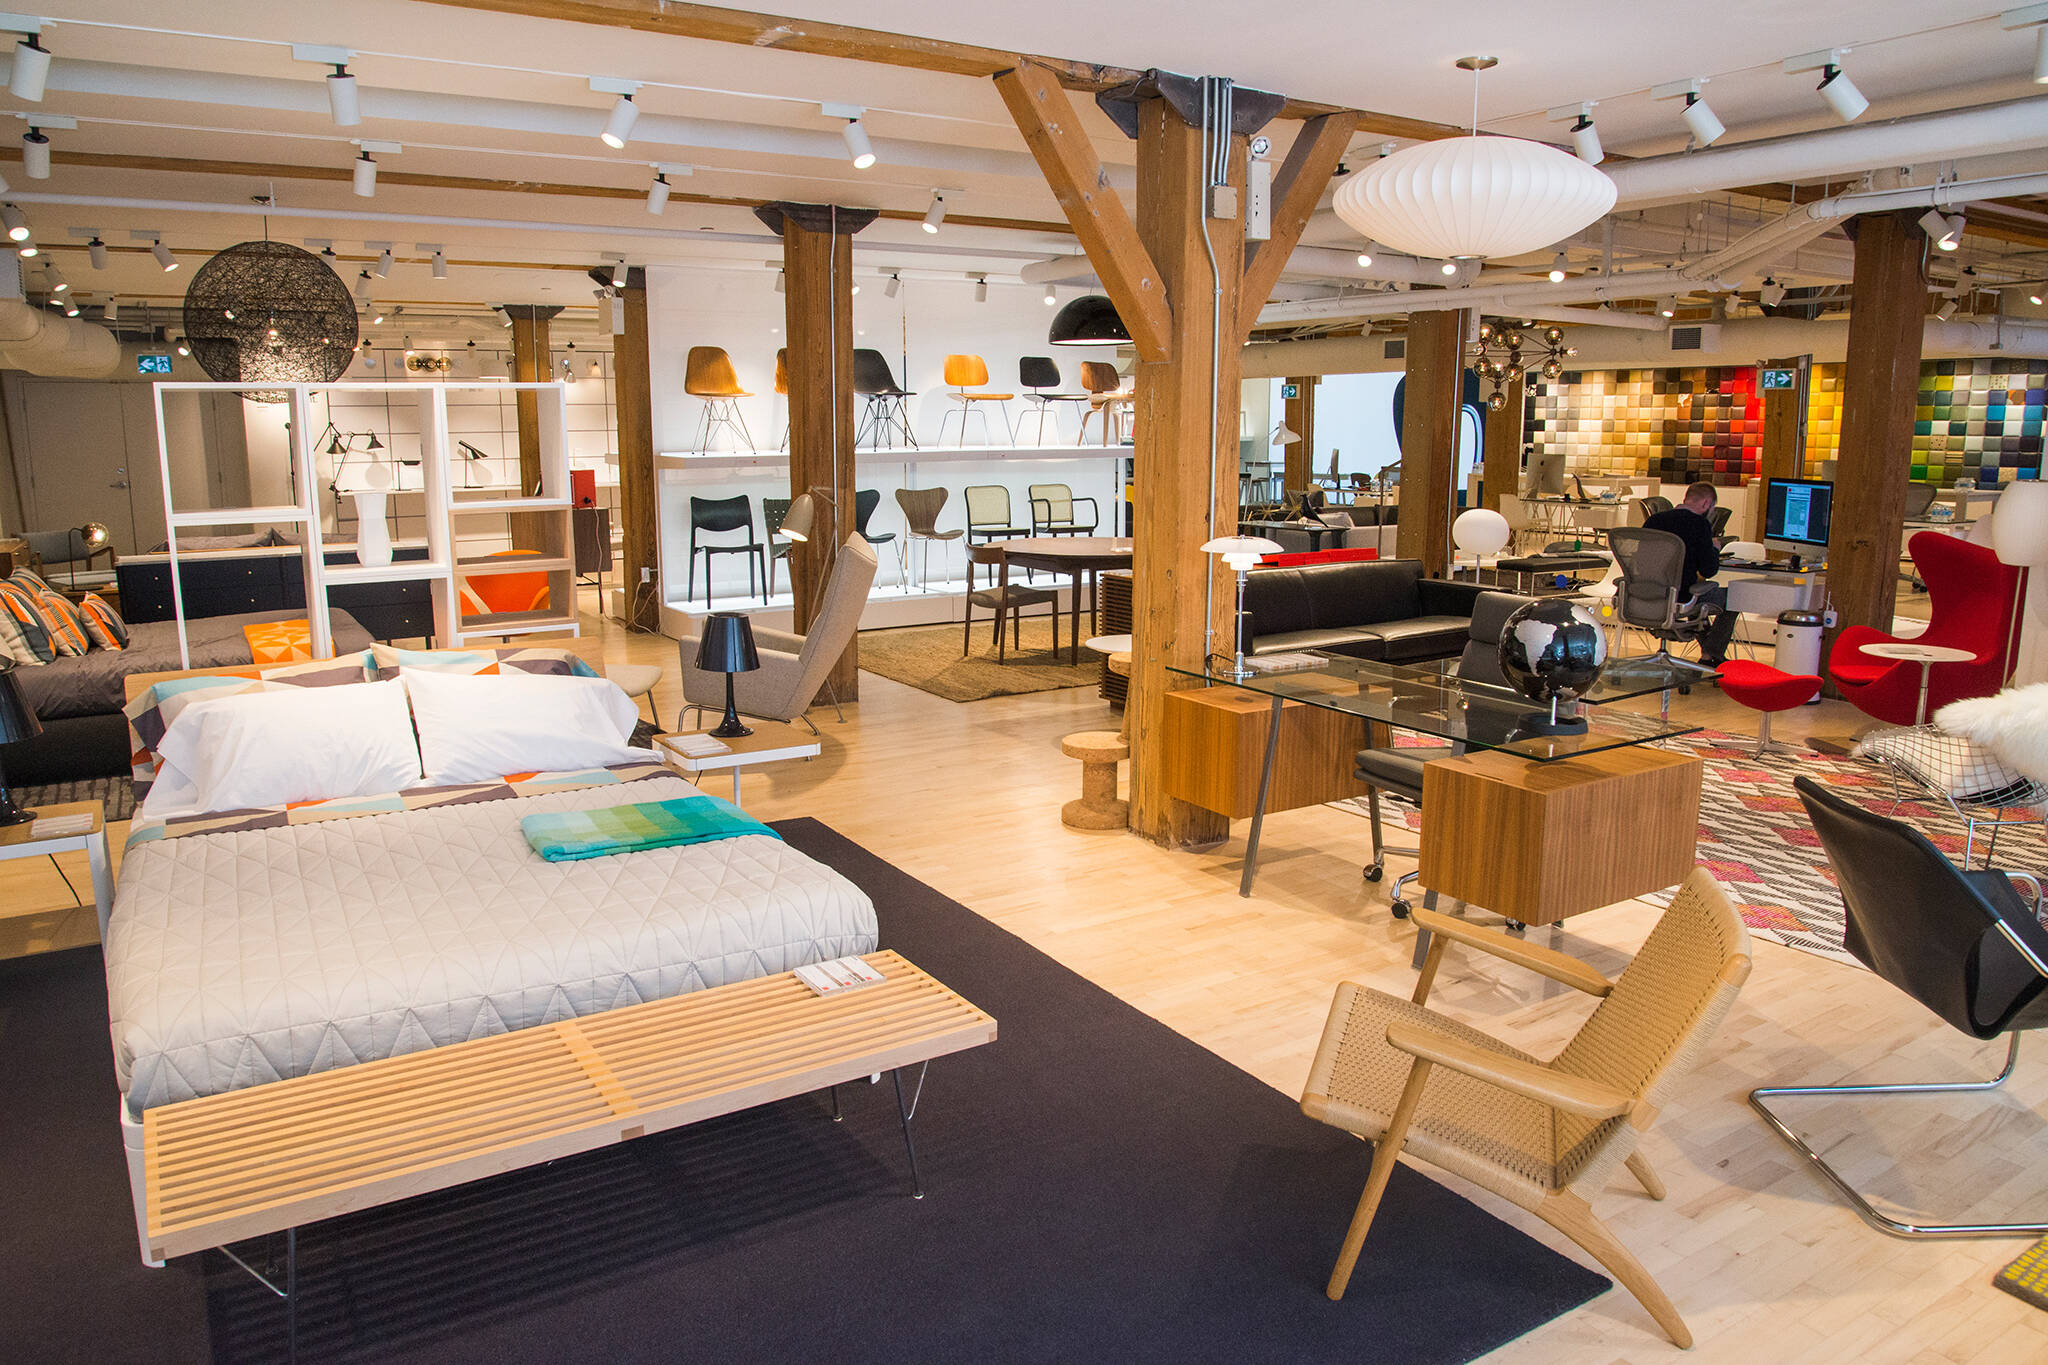 The Best Furniture Stores in Toronto